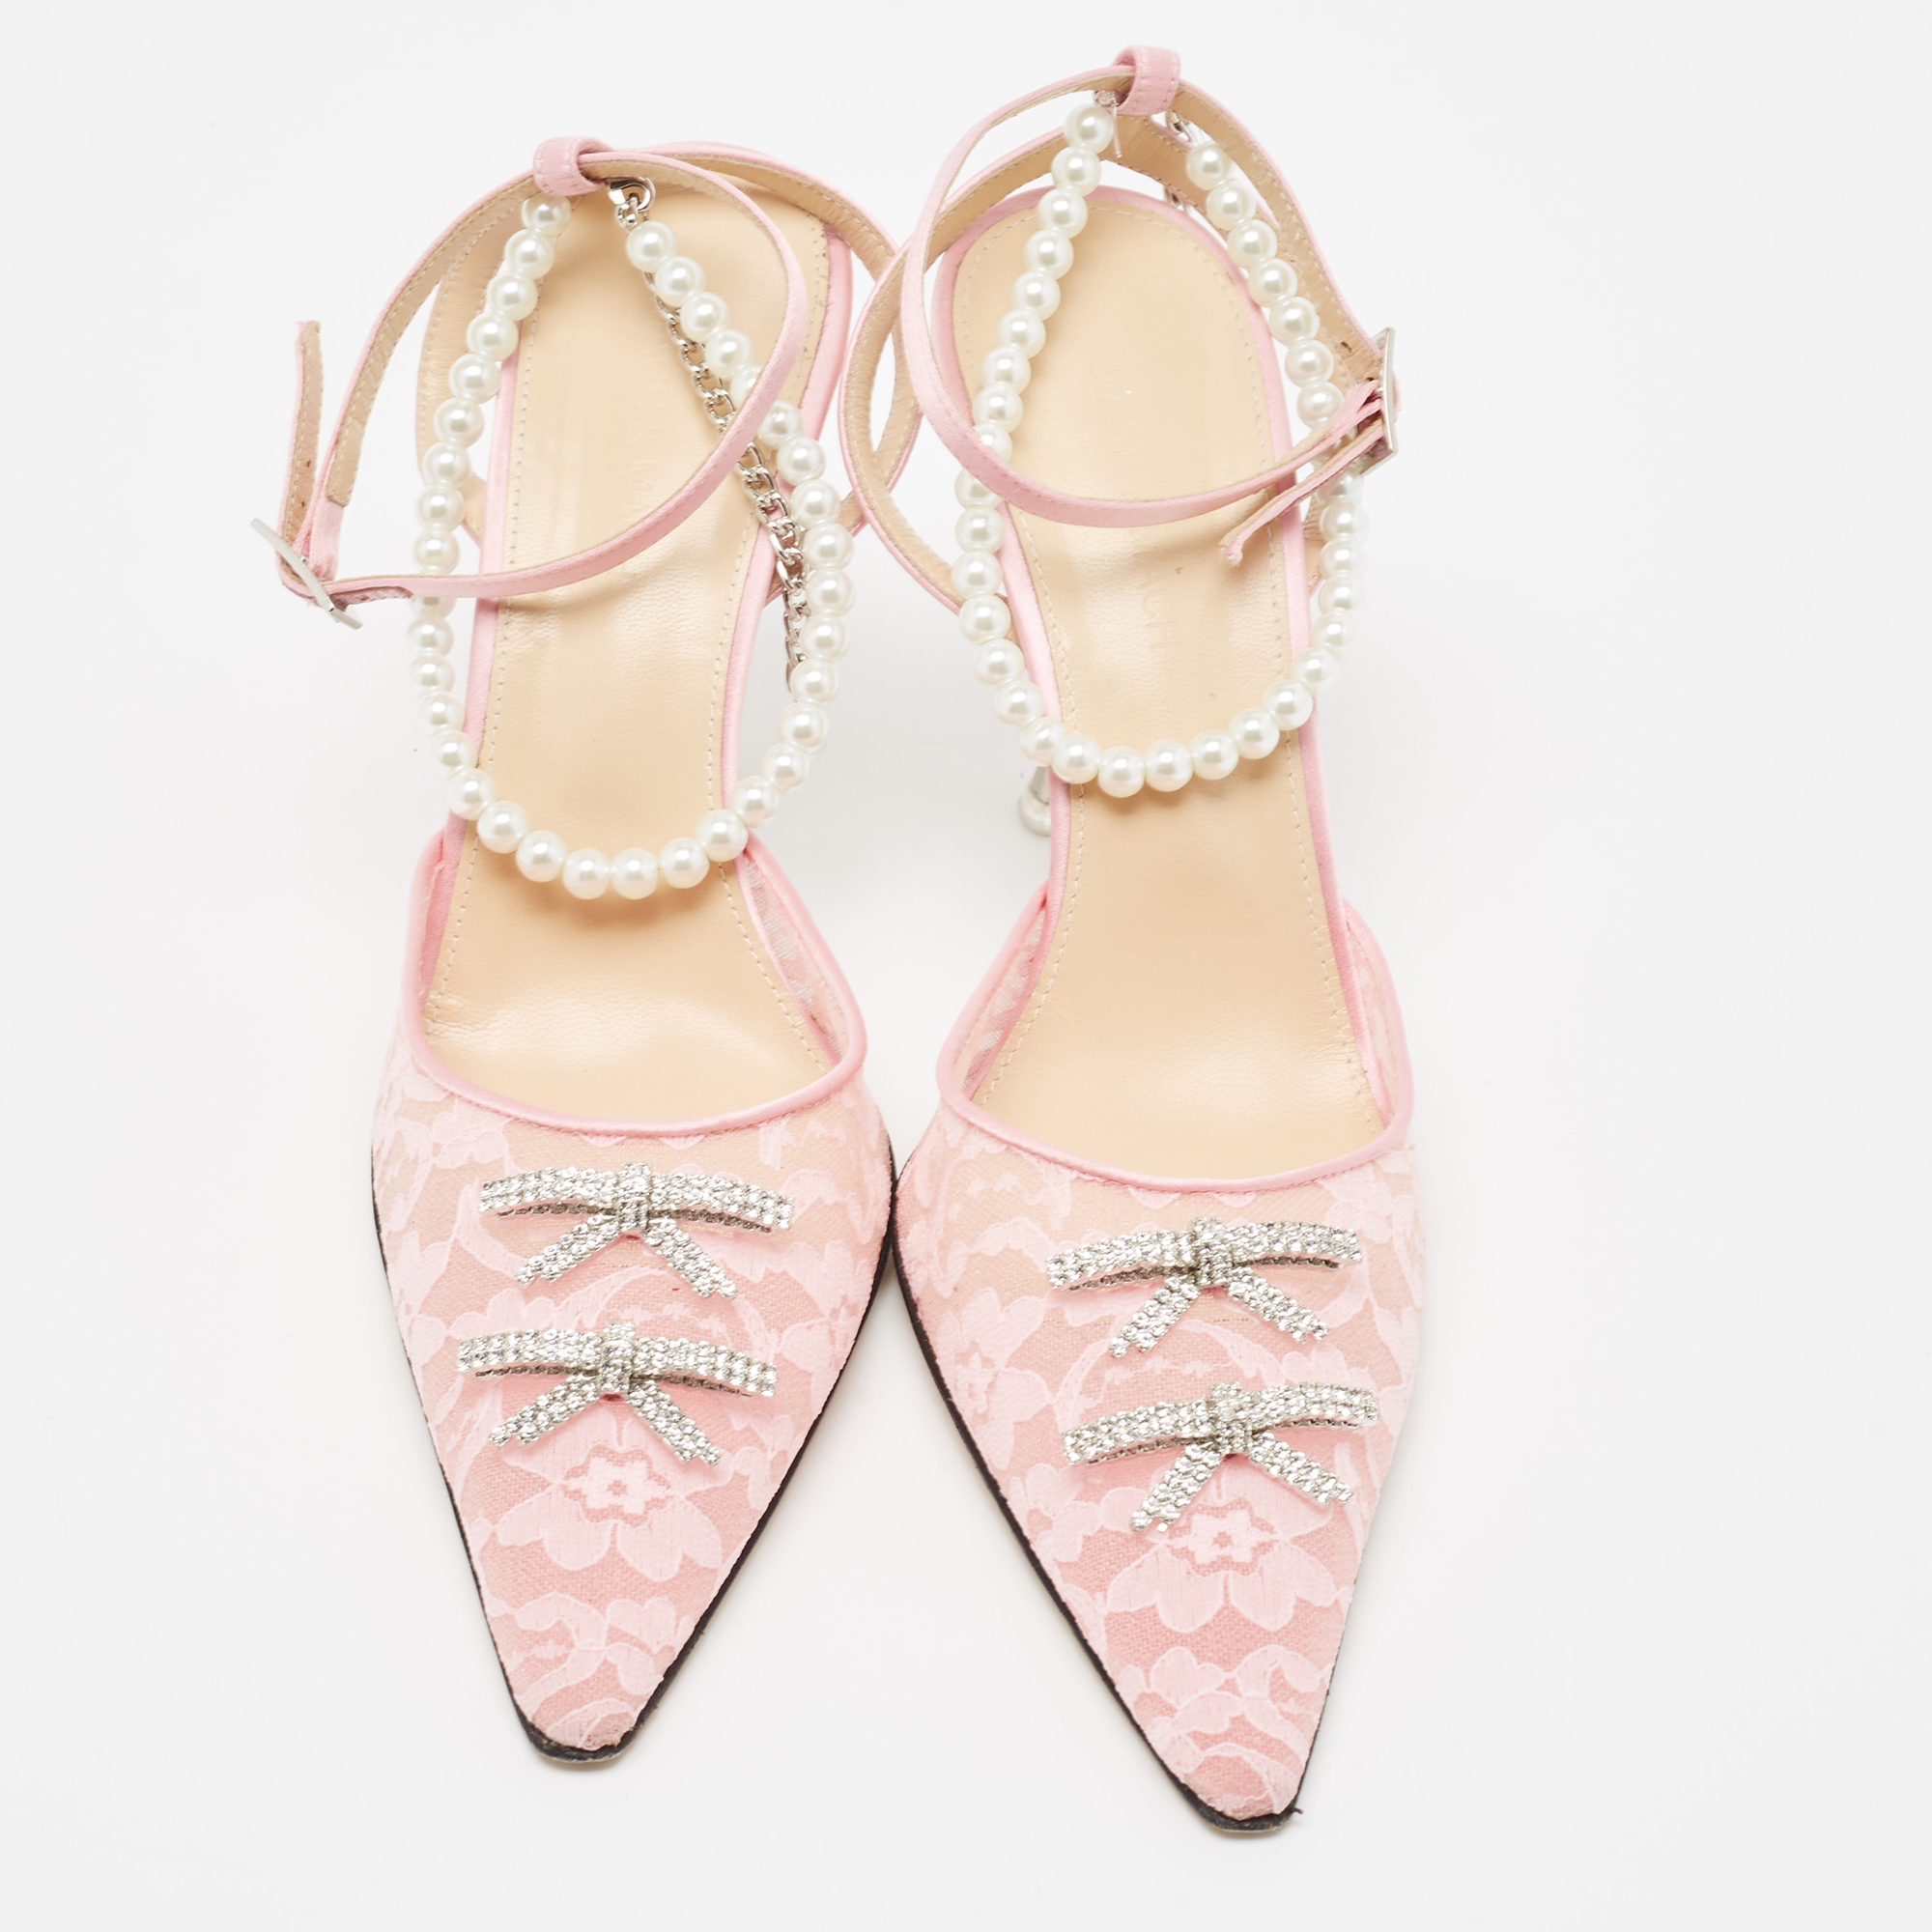 Mach & Mach Pink Satin And Lace Crystal Embellished Ankle Strap Pumps Size 39.5